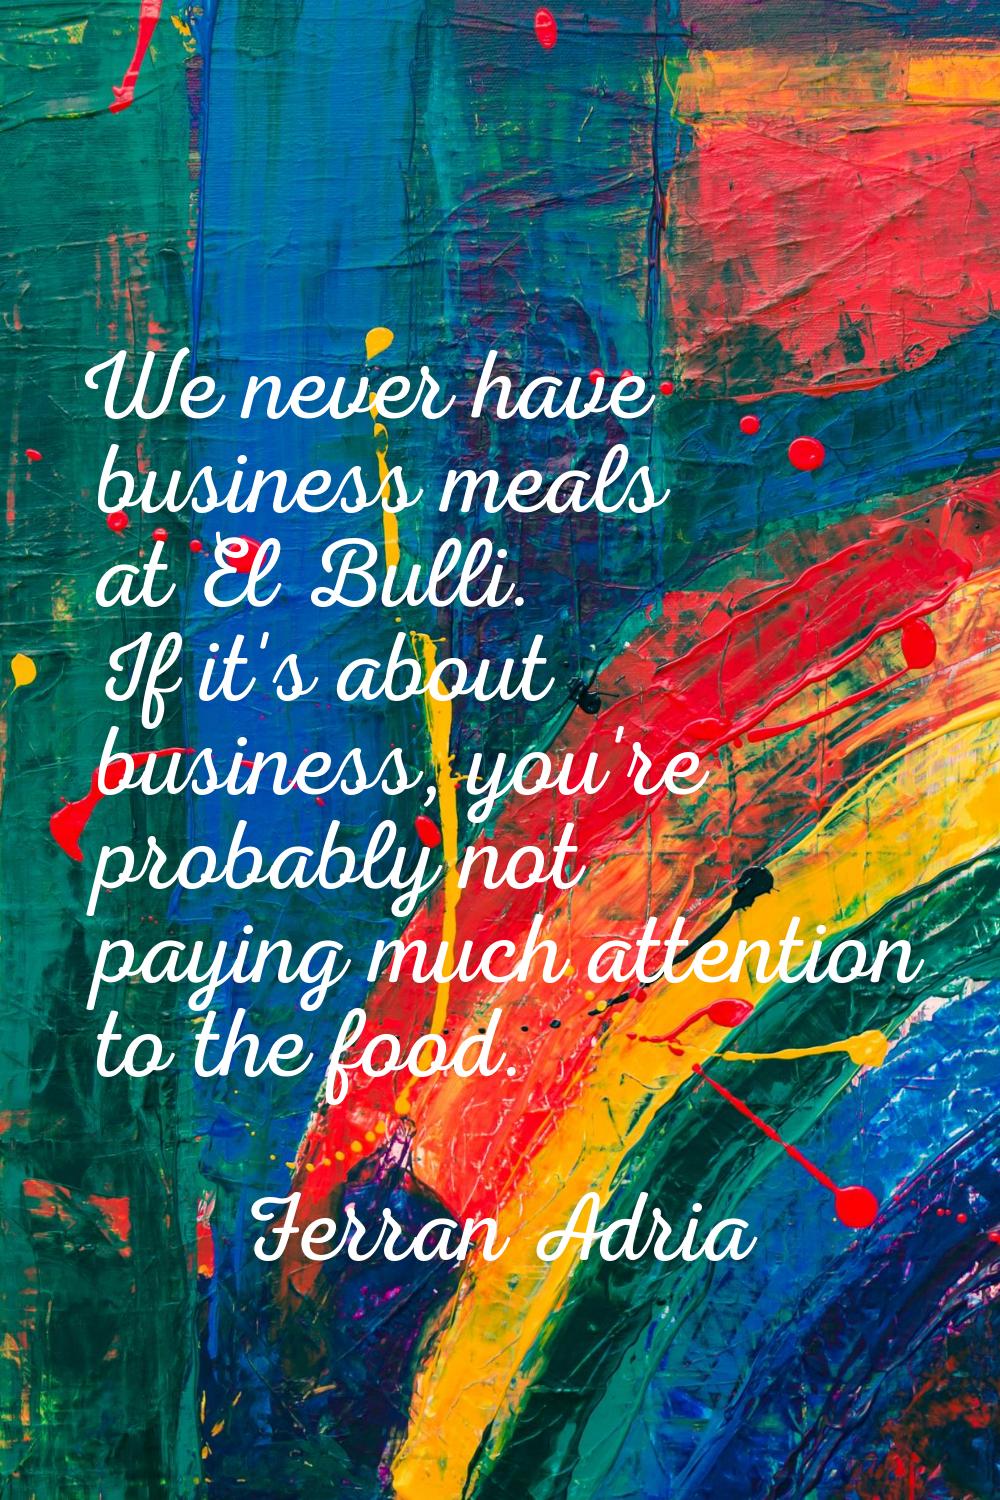 We never have business meals at El Bulli. If it's about business, you're probably not paying much a